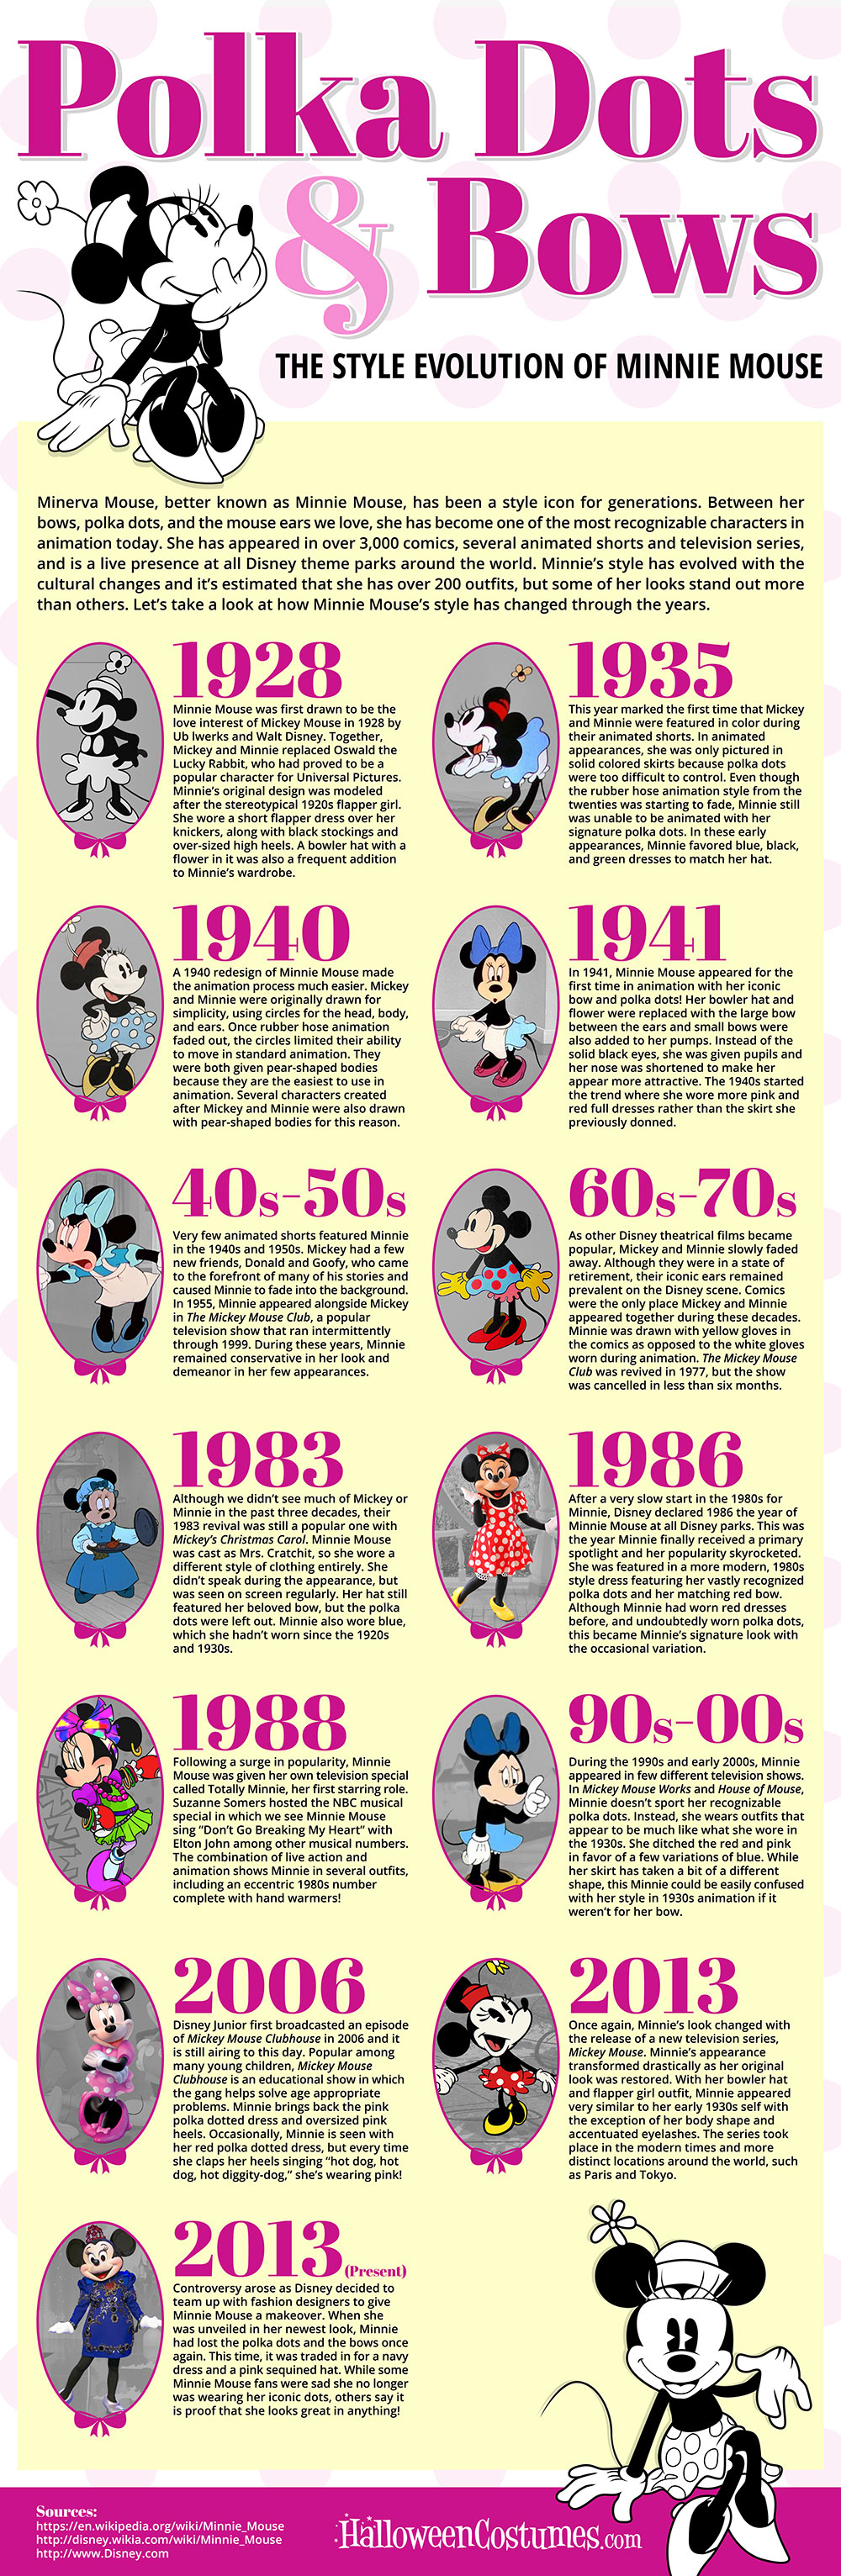  Evolution of Minnie Mouse